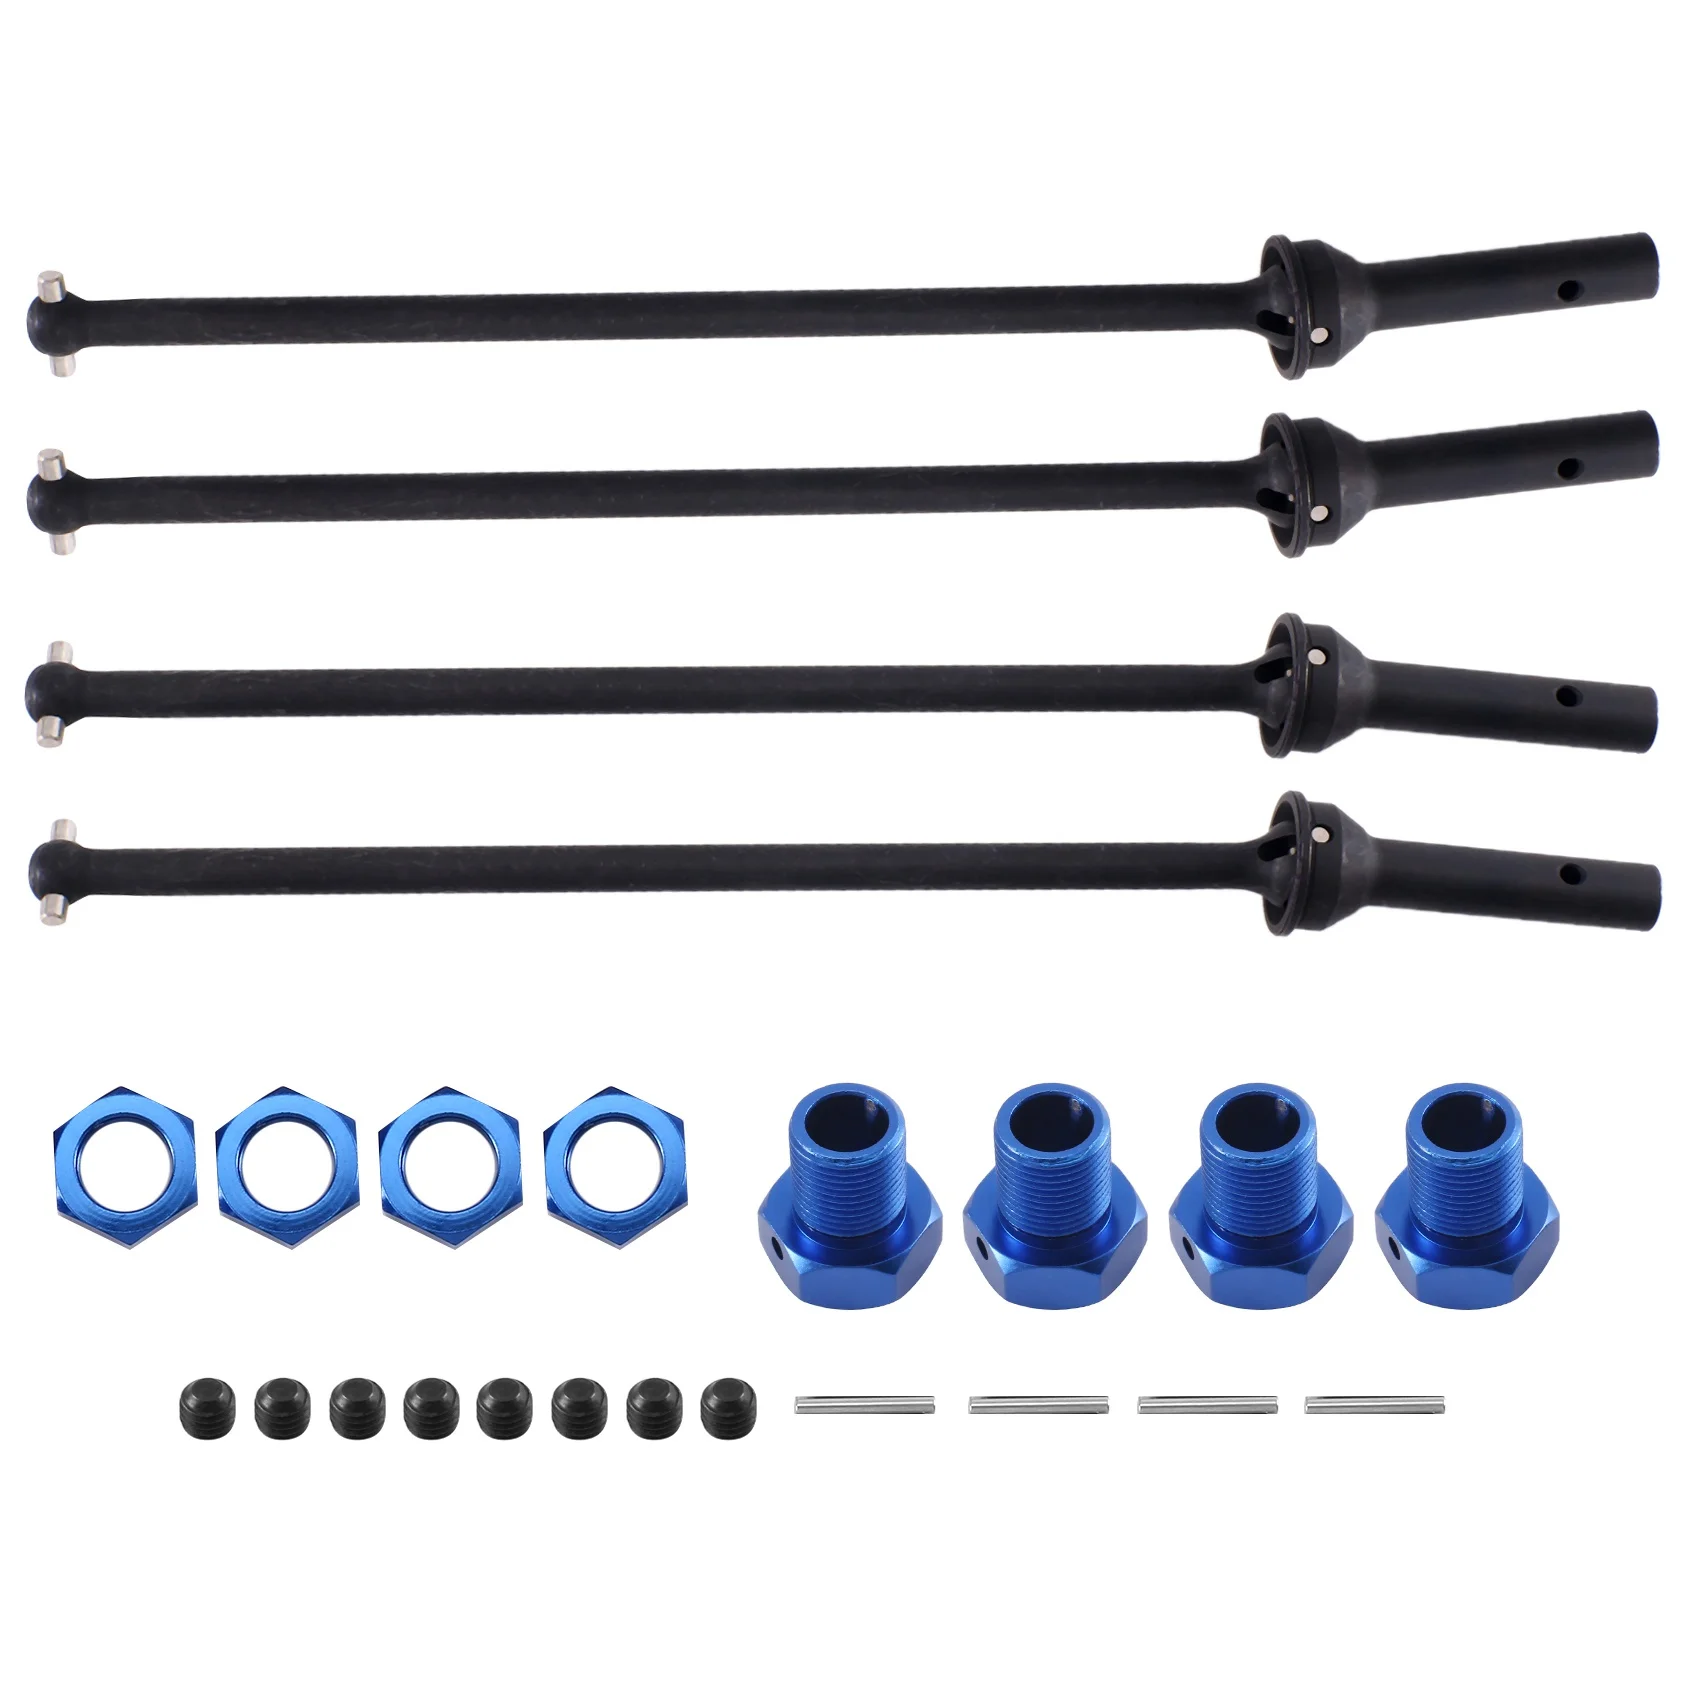 

4Pcs Metal Front and Rear Drive Shaft CVD with Extended Wheel Hex for 1/10 Arrma Kraton Outcast Upgrades Parts,Blue